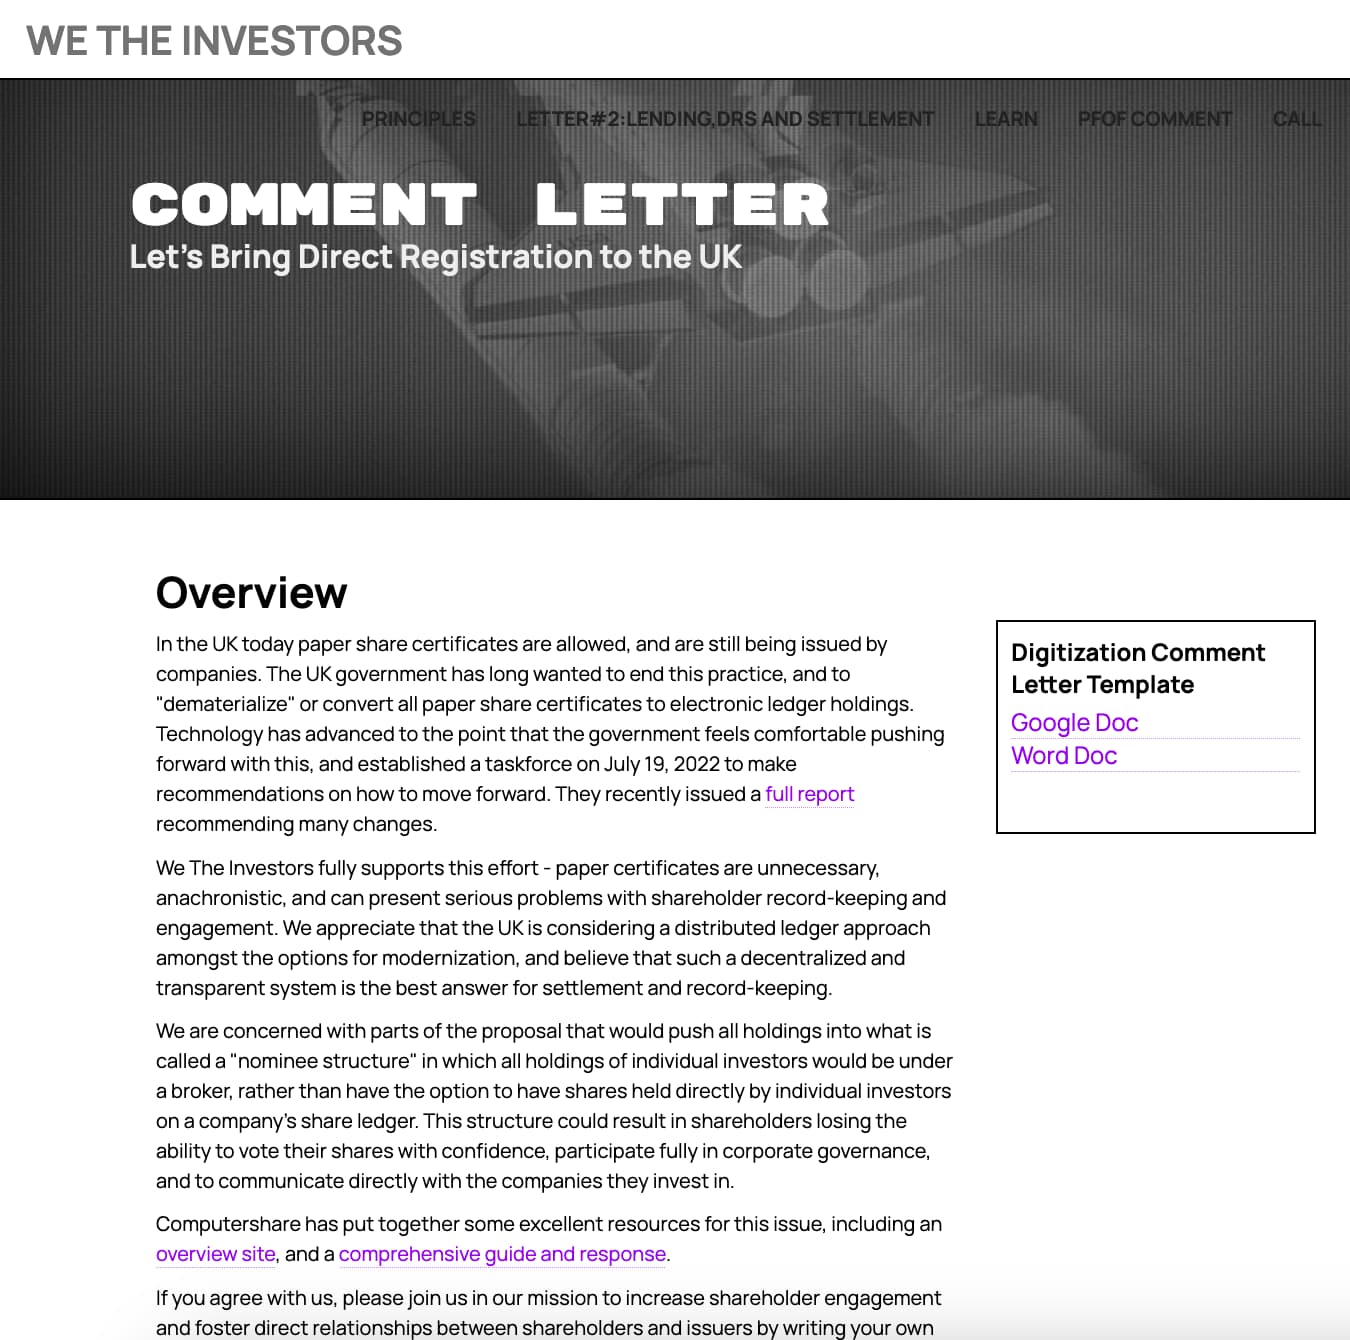 SCREEN SHOT OF WE THE INVESTORS COMMENT LETTER